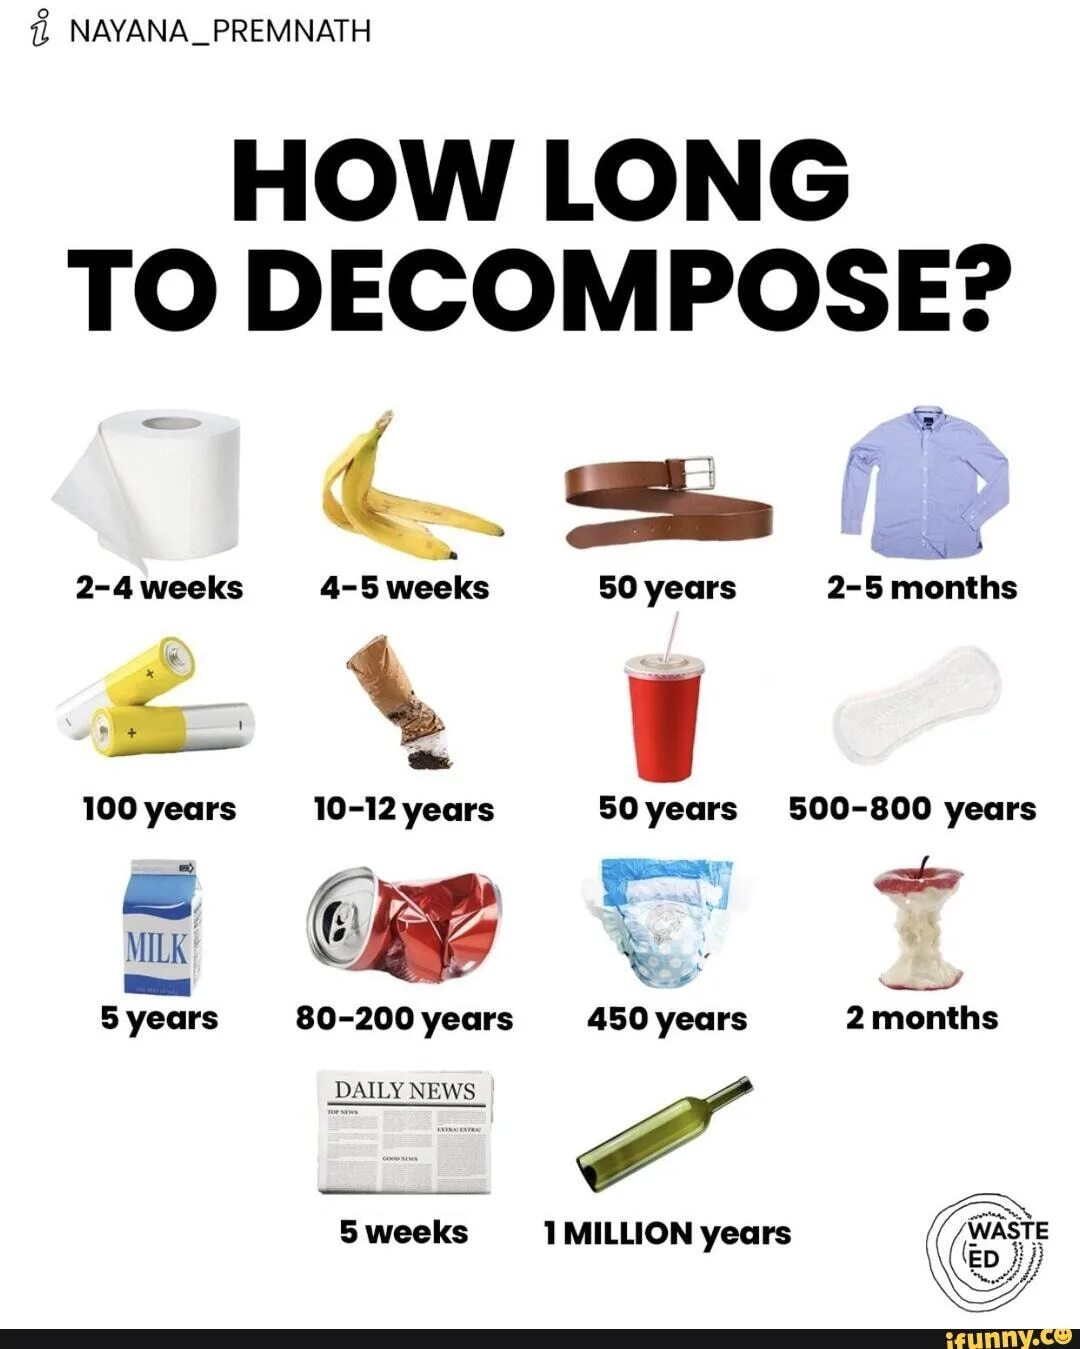 How long does it take to decompose. How long does it take for Garbage to decompose. How long does the Garbage decompose?. Decompose существительное. How much longer it takes